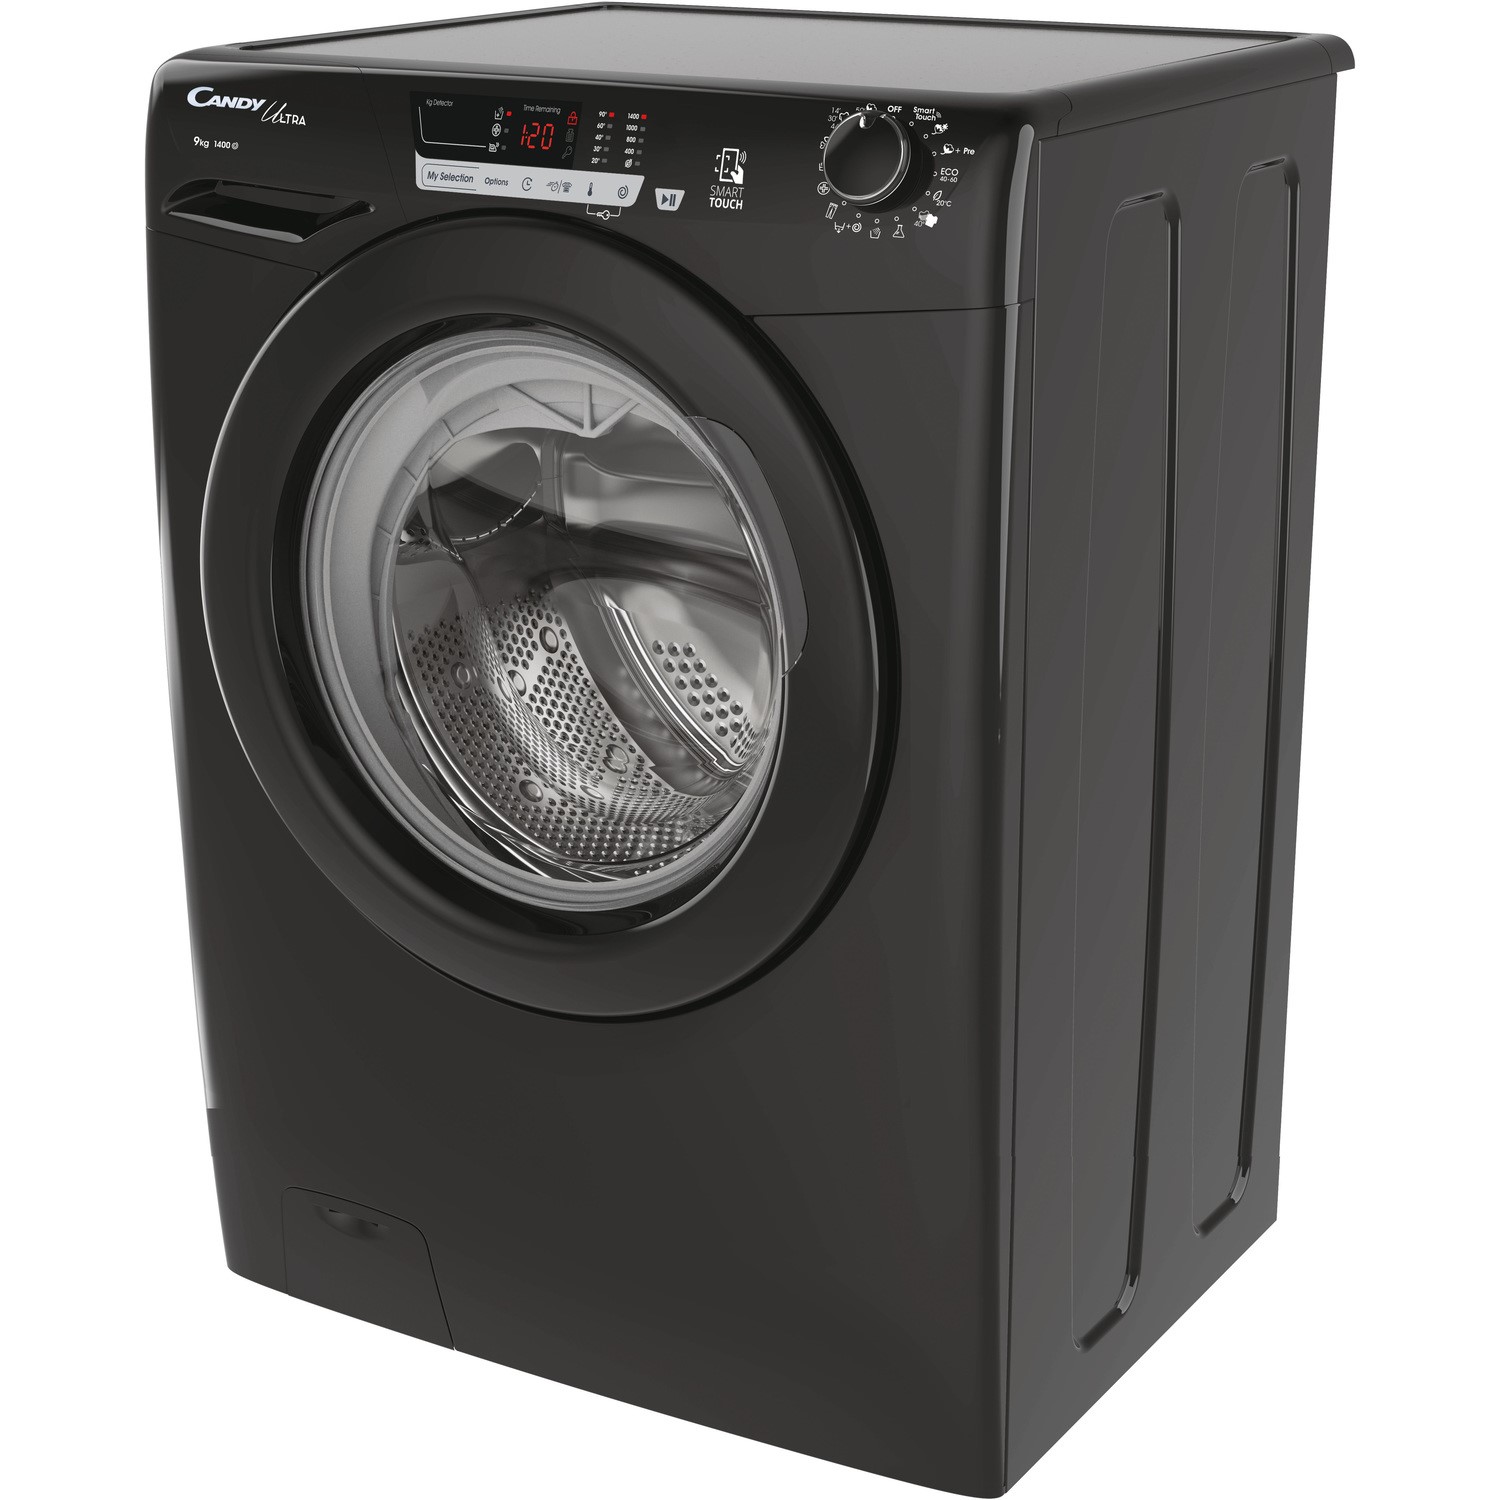 D Rated Black Candy Ultra HCU1492DBBE/1 9Kg Washing Machine with 1400 rpm